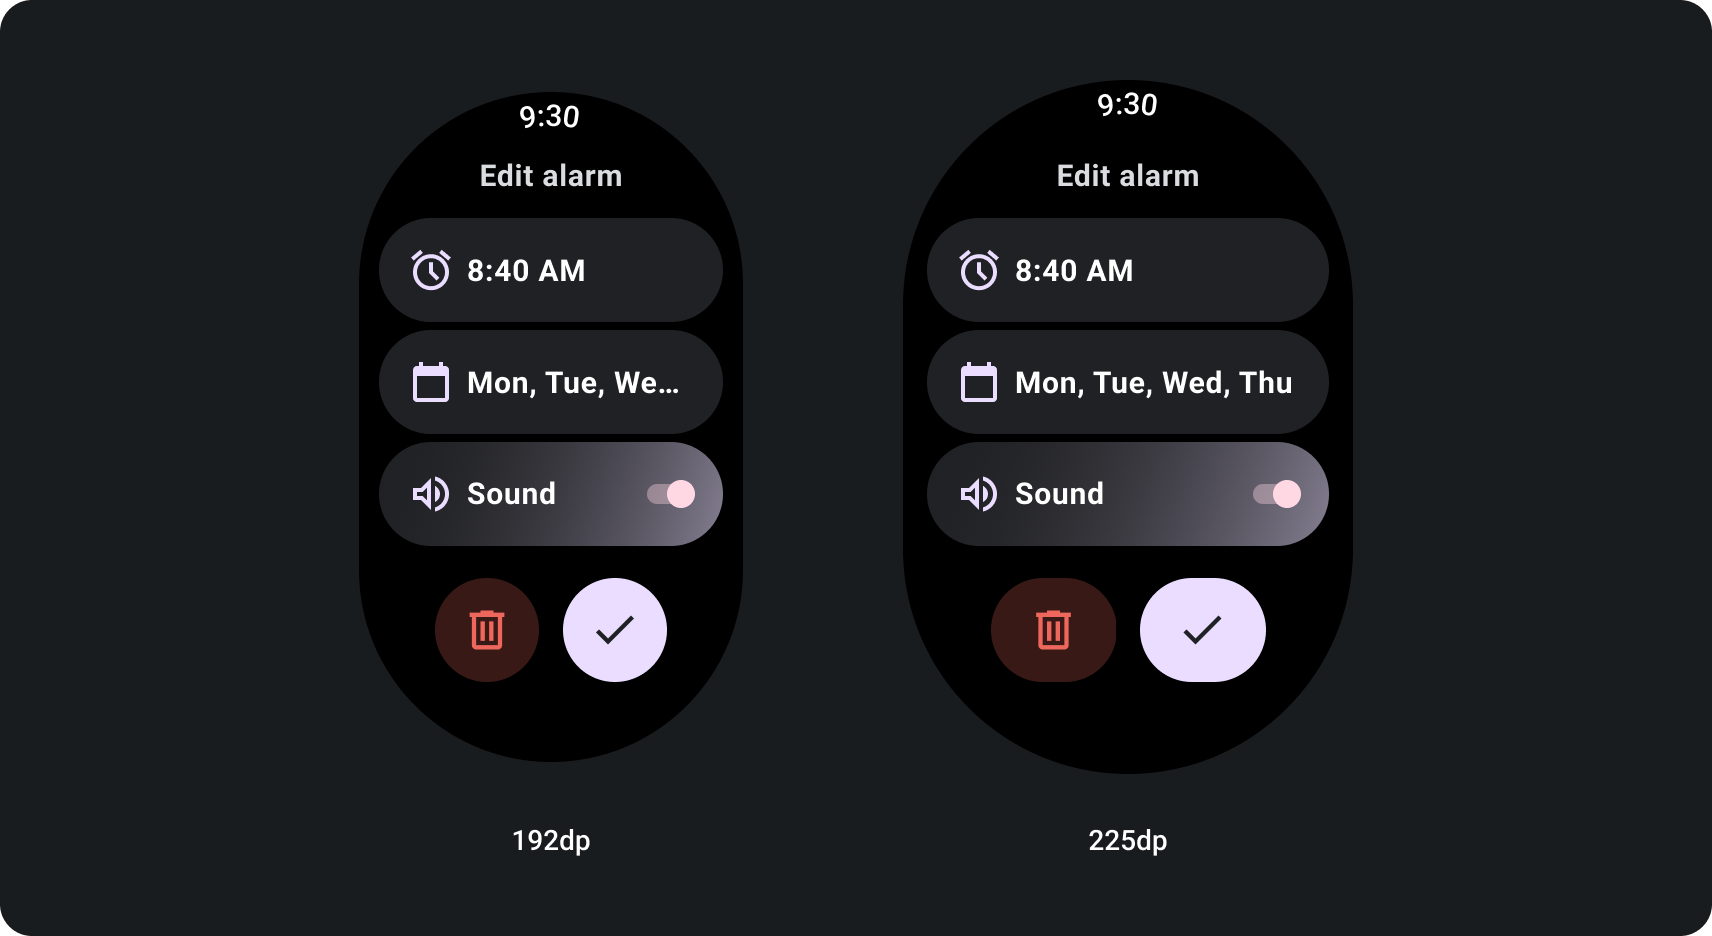 Buttons are wider, and more text fits on list items, in the layout for larger screen sizes